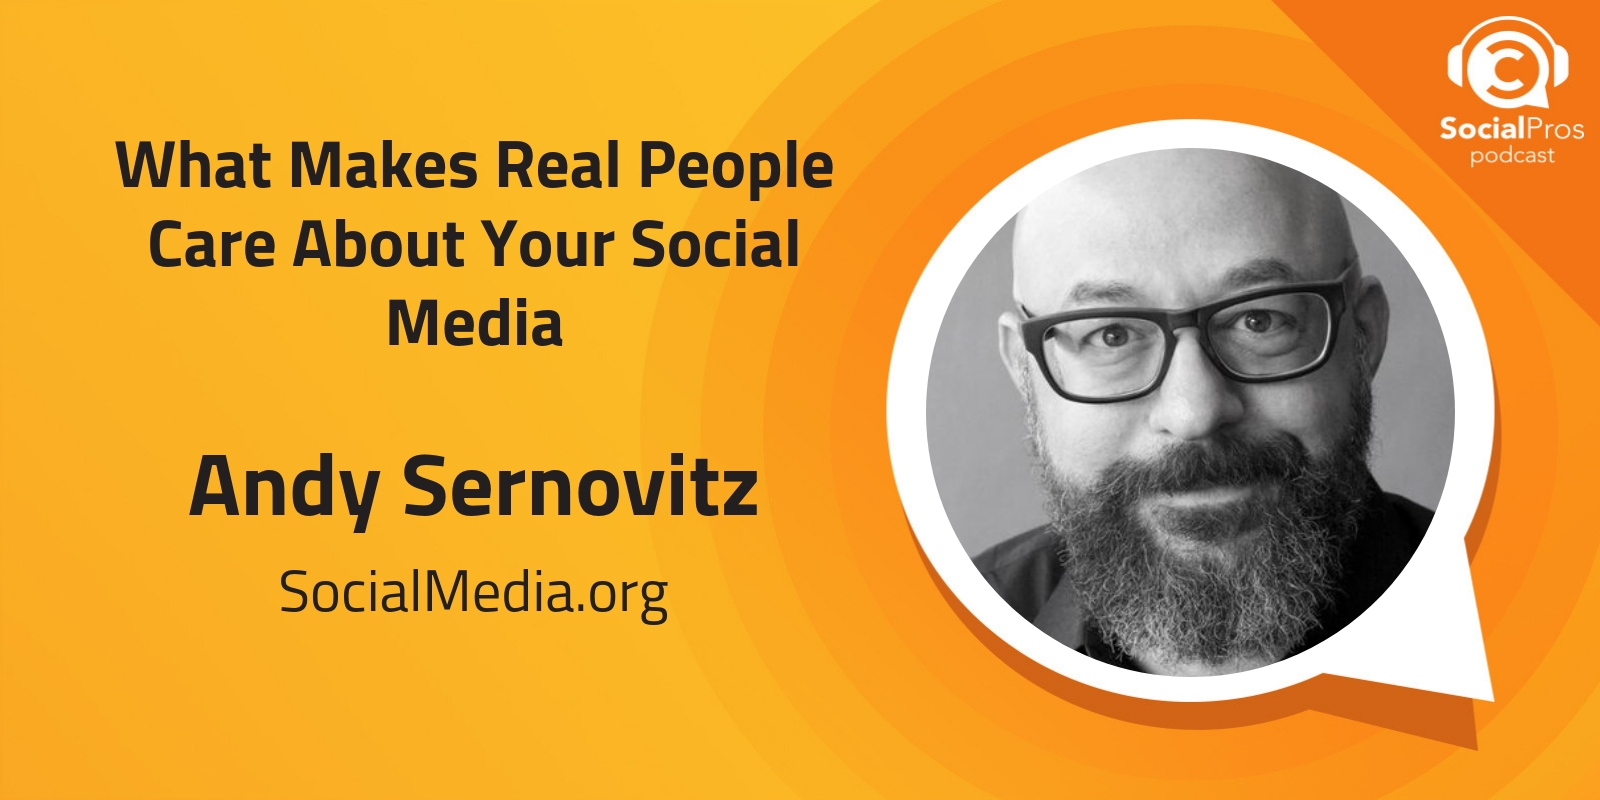 What Makes Real People Care About Your Social Media